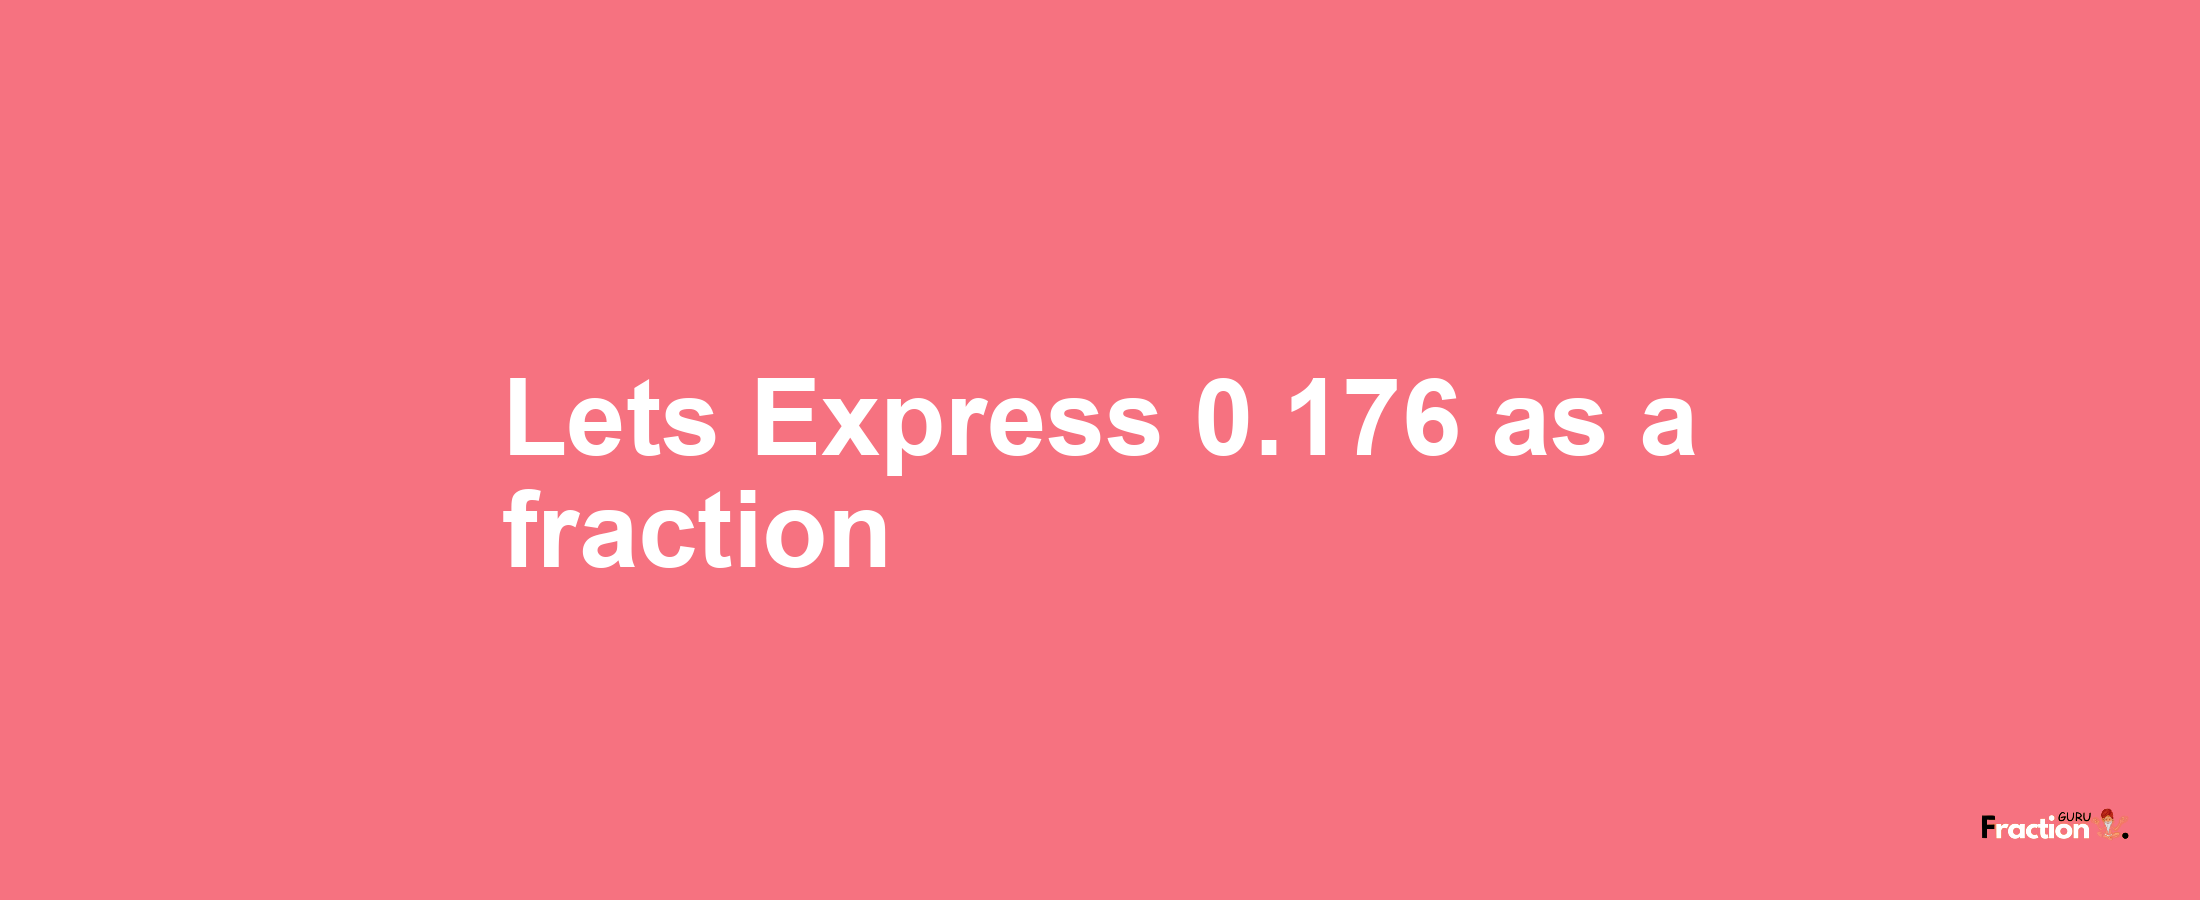 Lets Express 0.176 as afraction